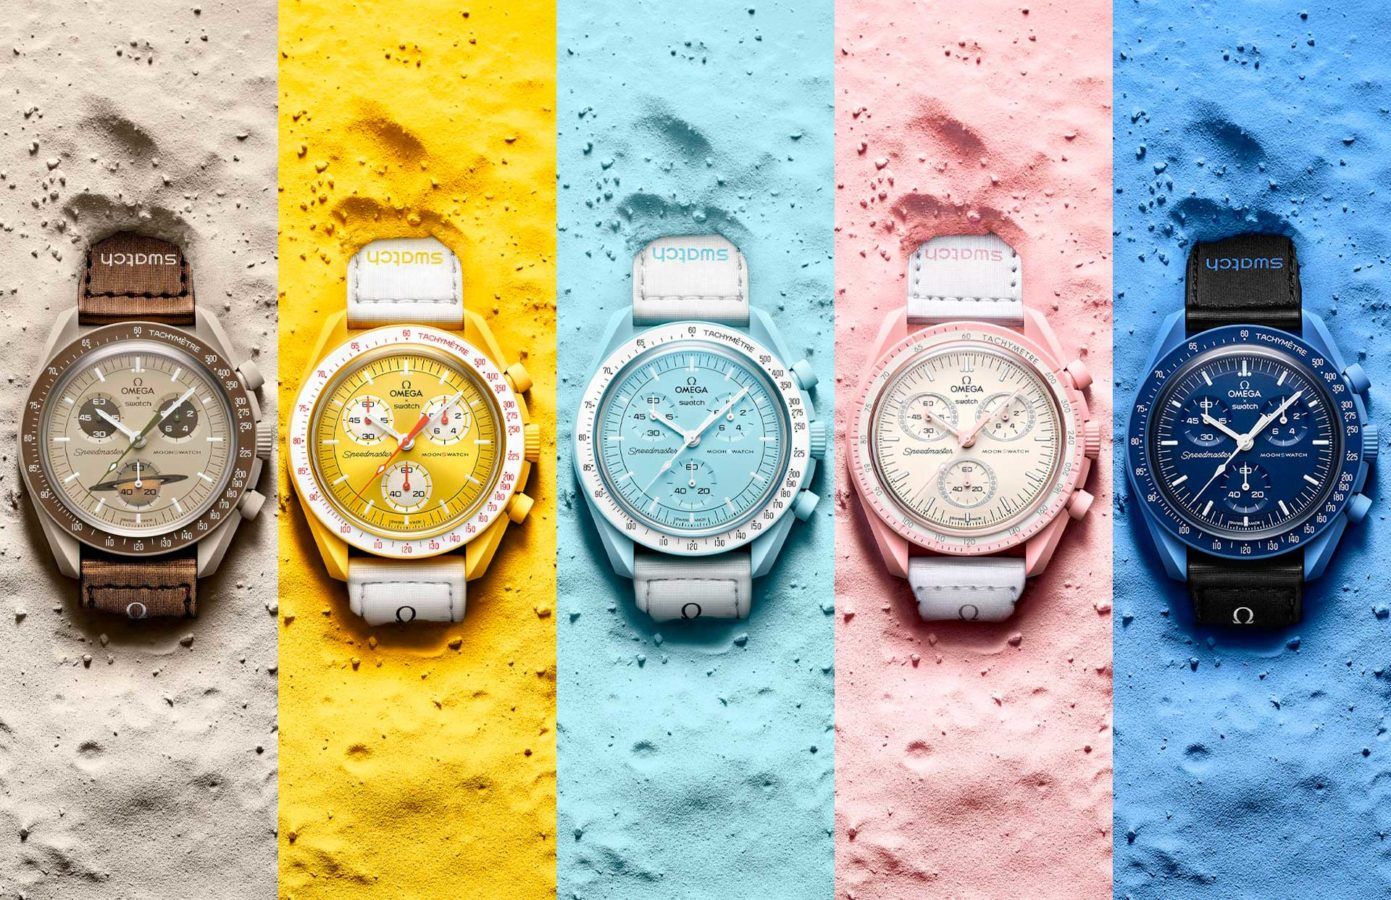 Omega x Swatch MoonSwatch: Where You Can Still Find Them